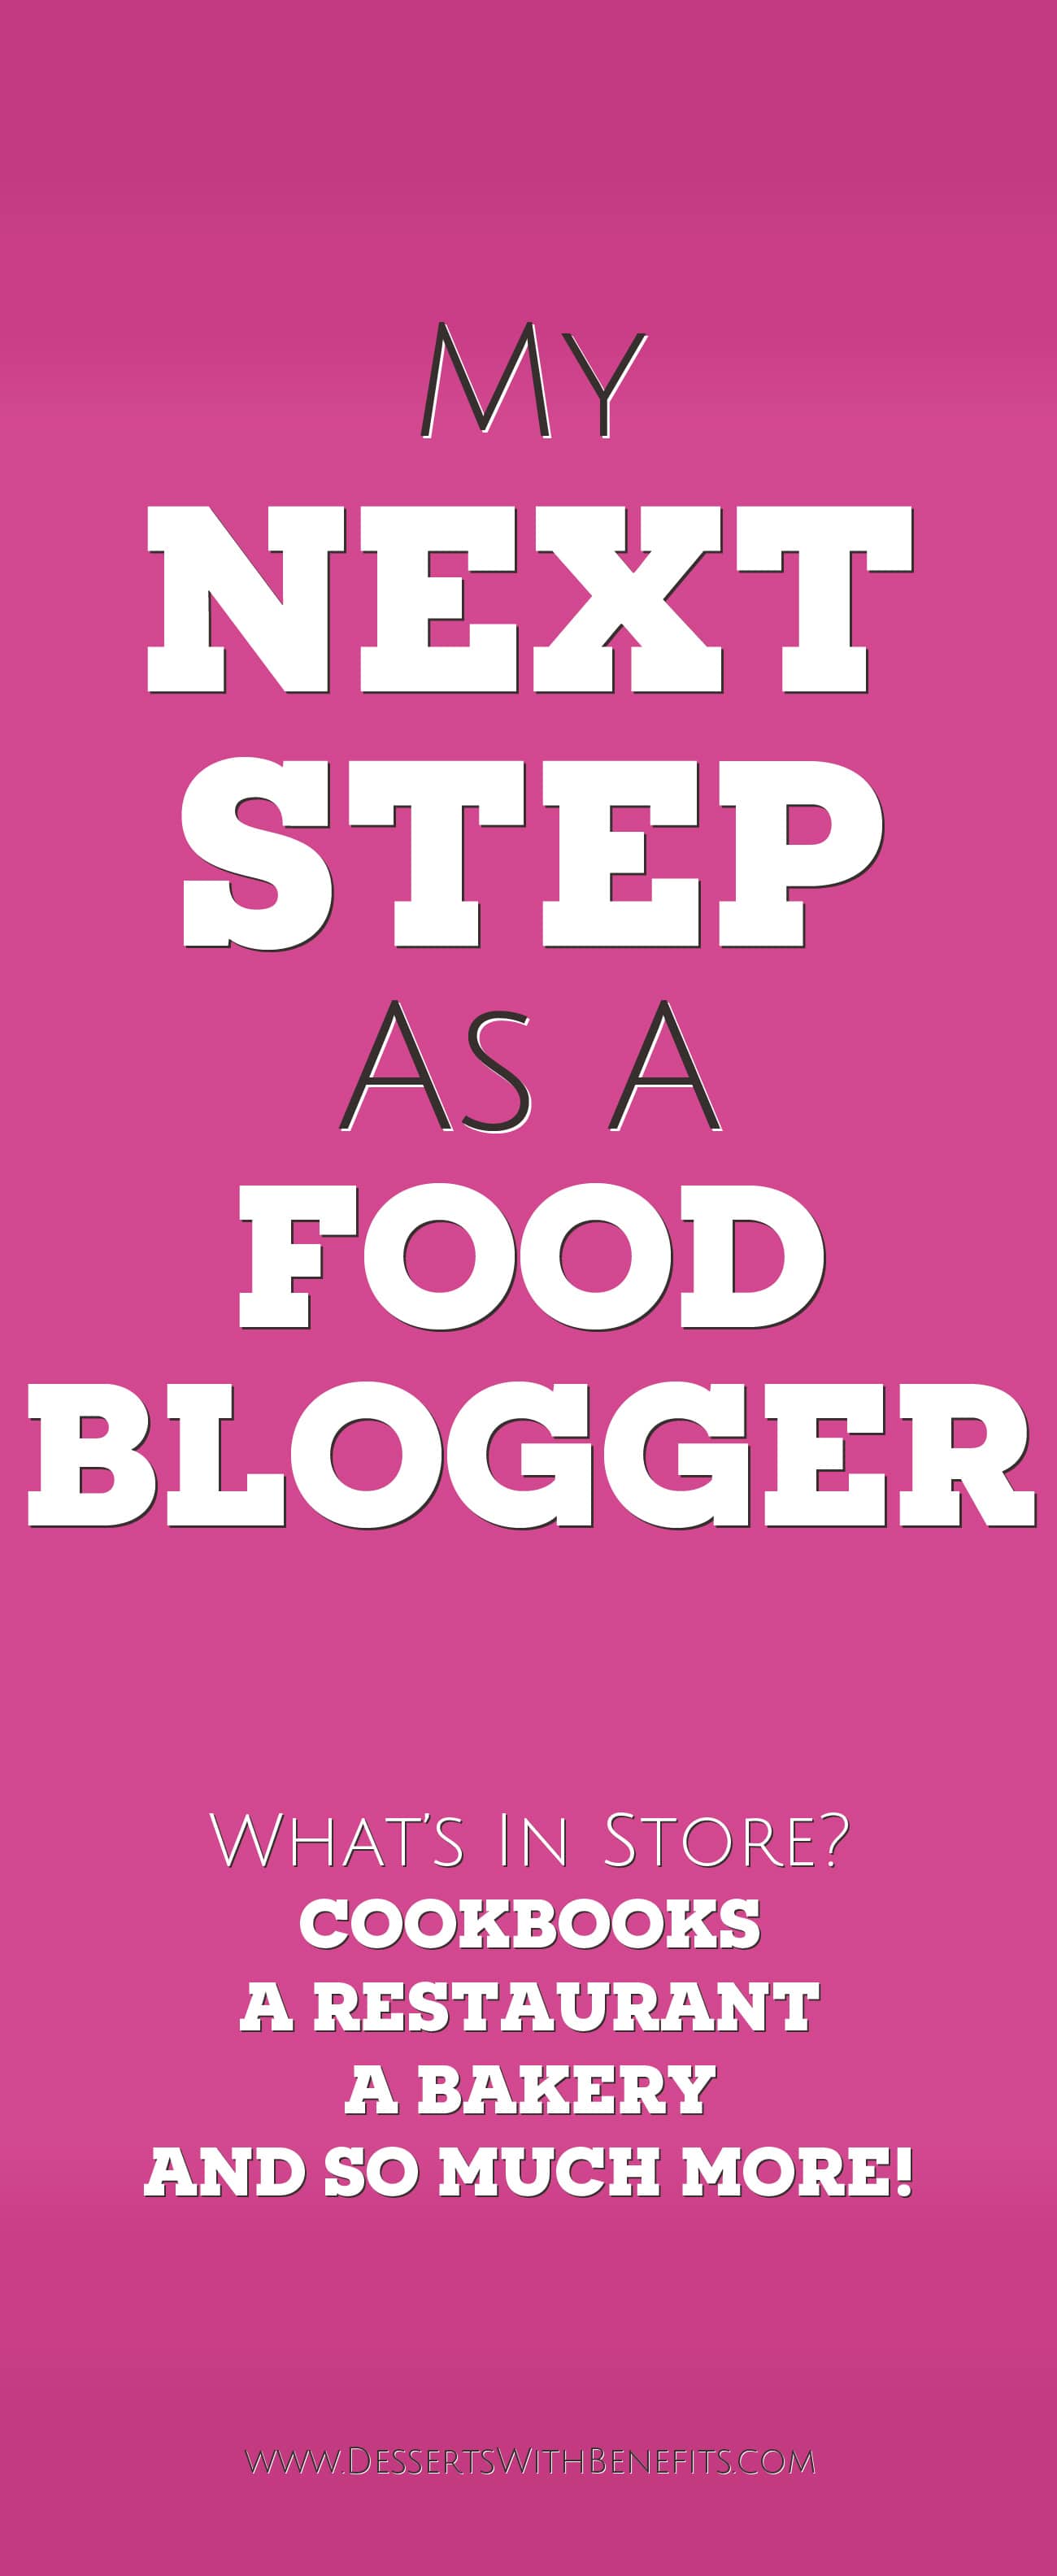 Taking Blogging to the NEXT STEP -- Blogger to Bakery Owner? Jessica Stier of the Desserts With Benefits Blog